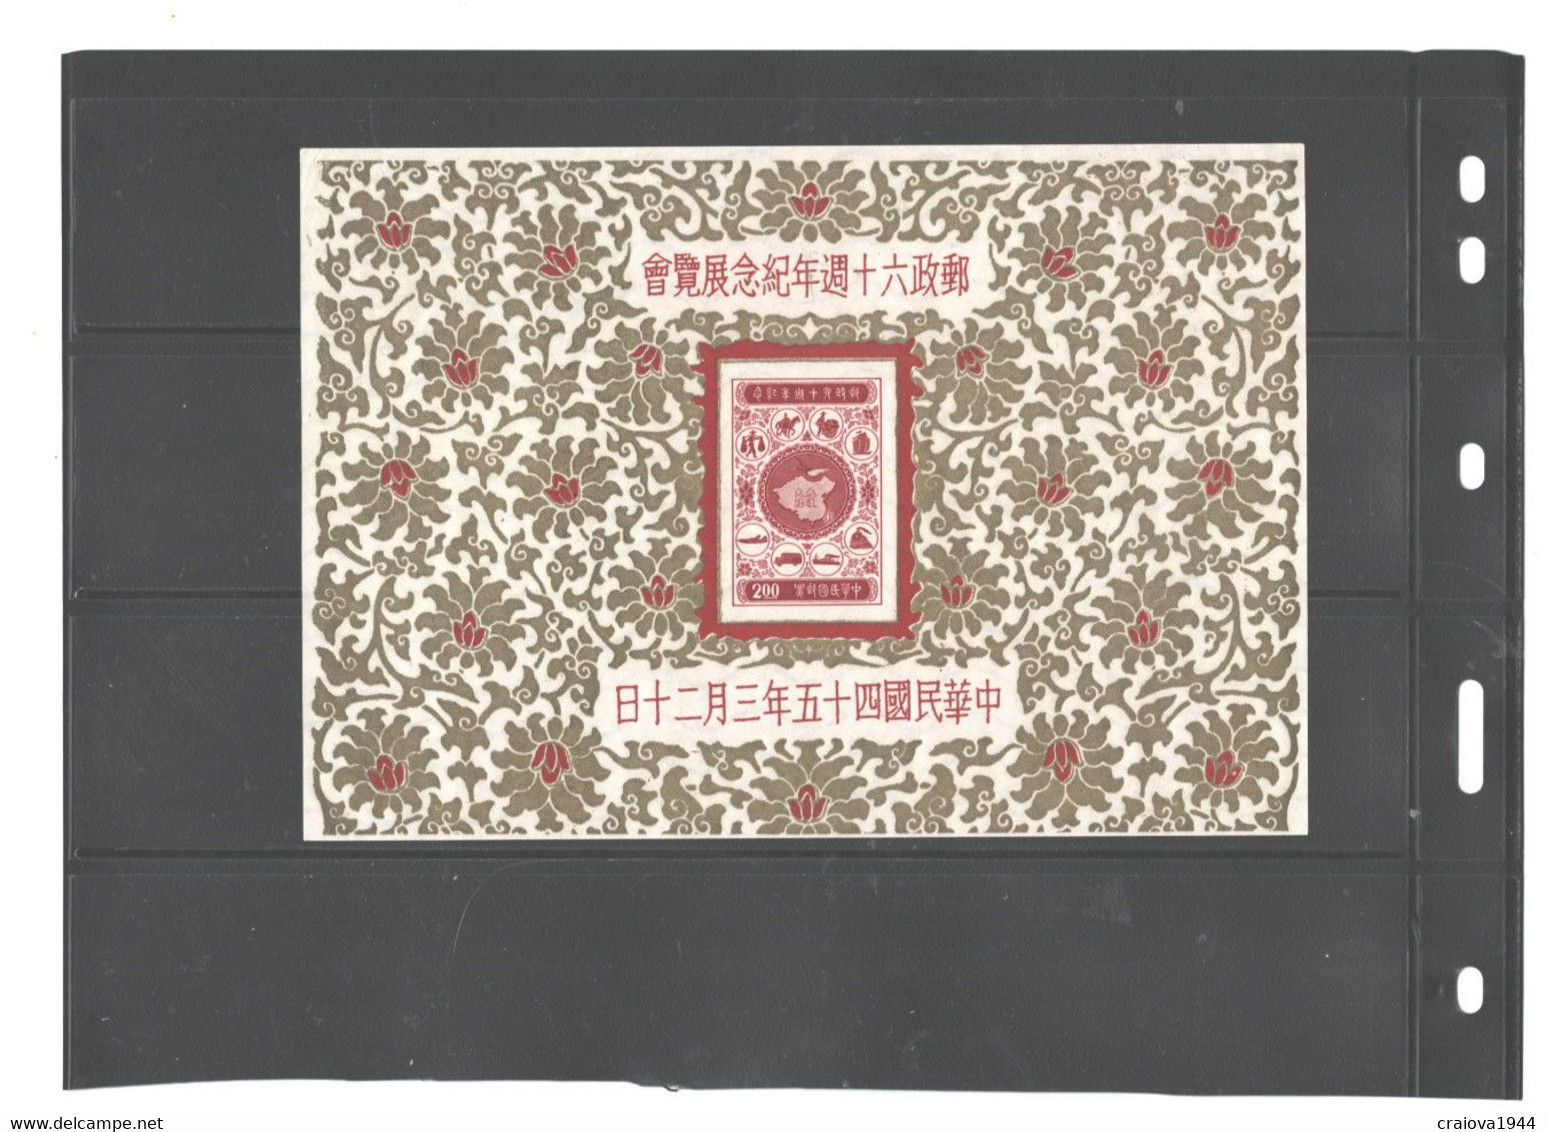 REPUBLIC OF CHINA 1956 MS#1136 MNH NO GUM AS ISSUED - Unused Stamps